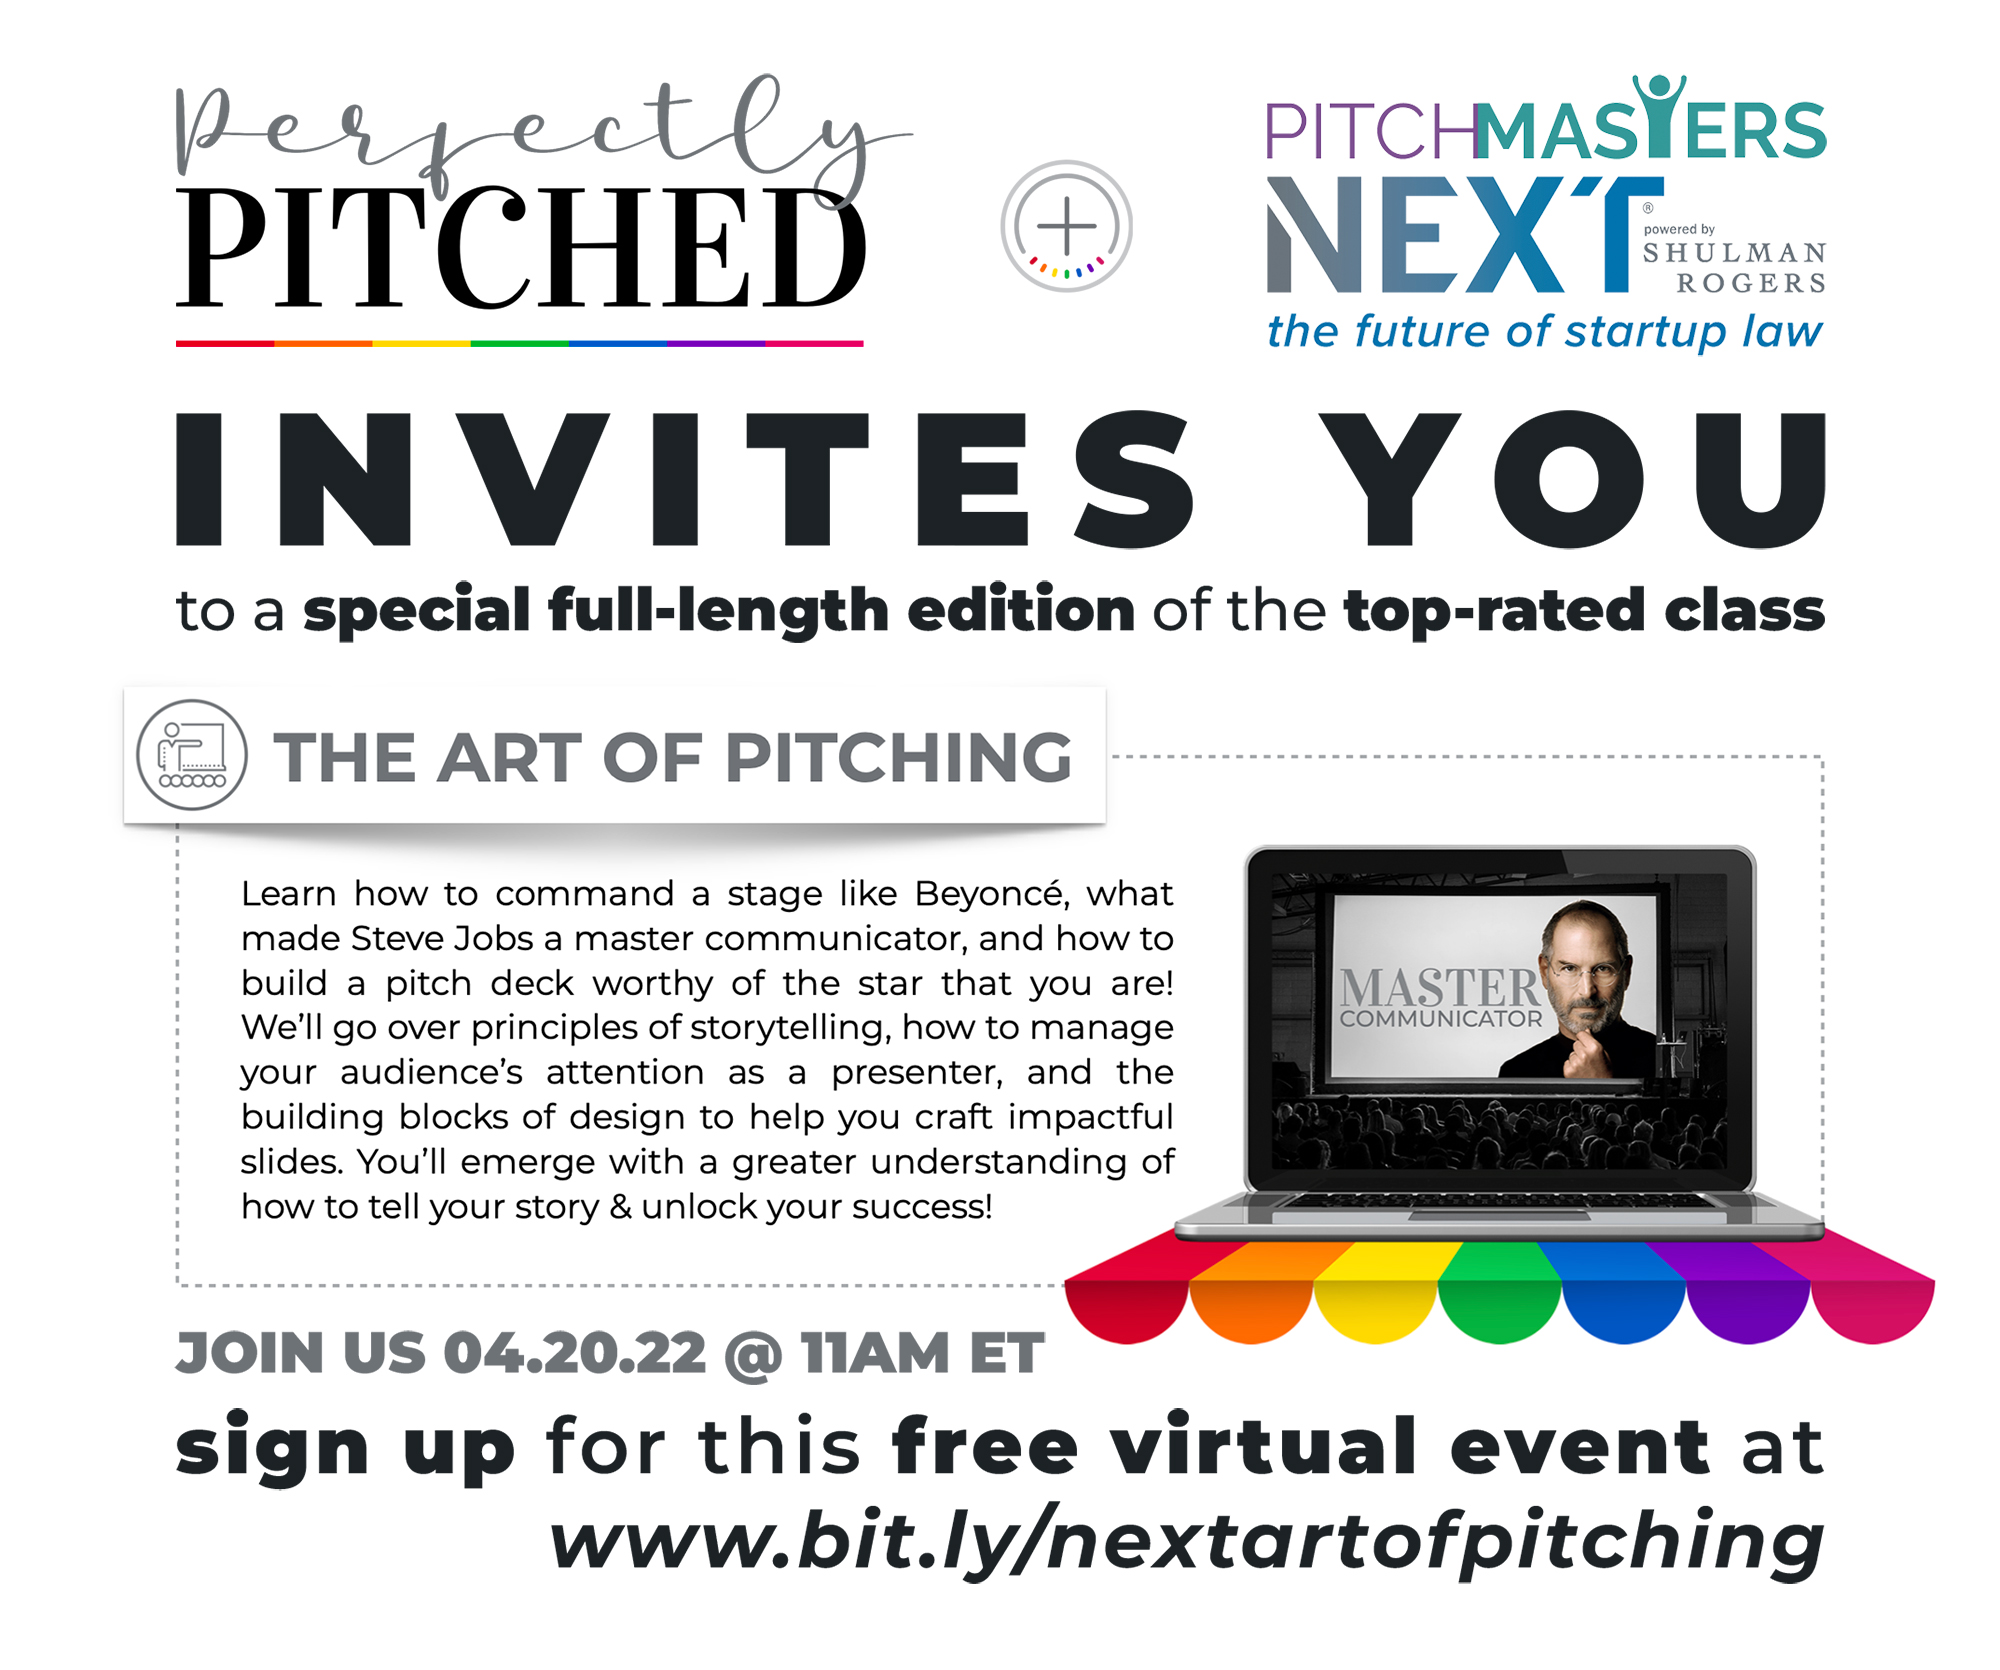 Perfectly Pitched & PitchMasters by NEXT by Shulman Rogers invites you to a special full-length edition of the top-rated class "The Art of Pitching"! Get your free ticket to this virtual event by signing up at www.bit.ly/nextartofpitching